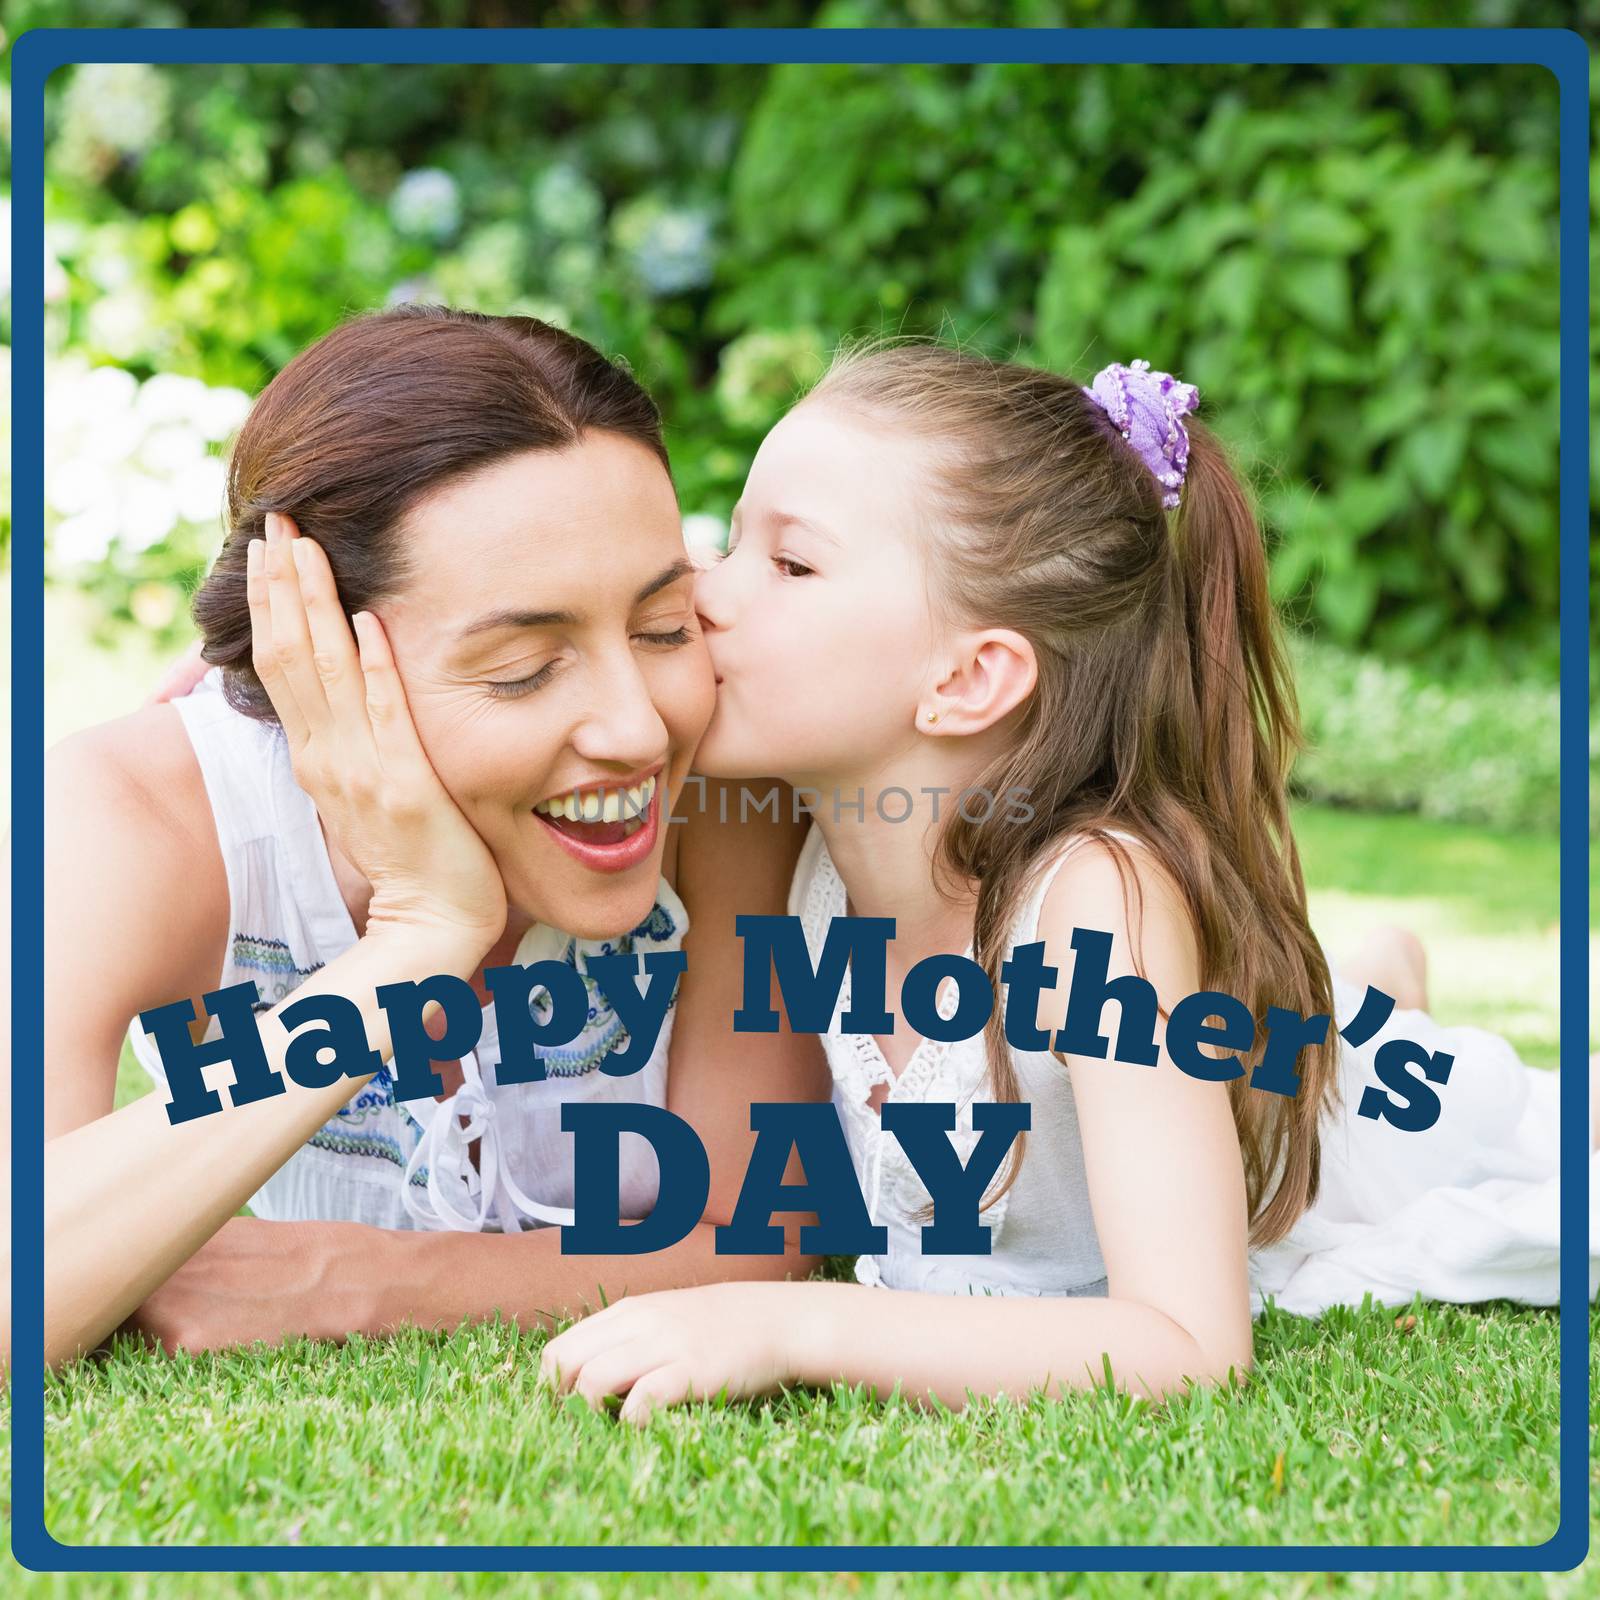 Composite image of mothers day greeting by Wavebreakmedia